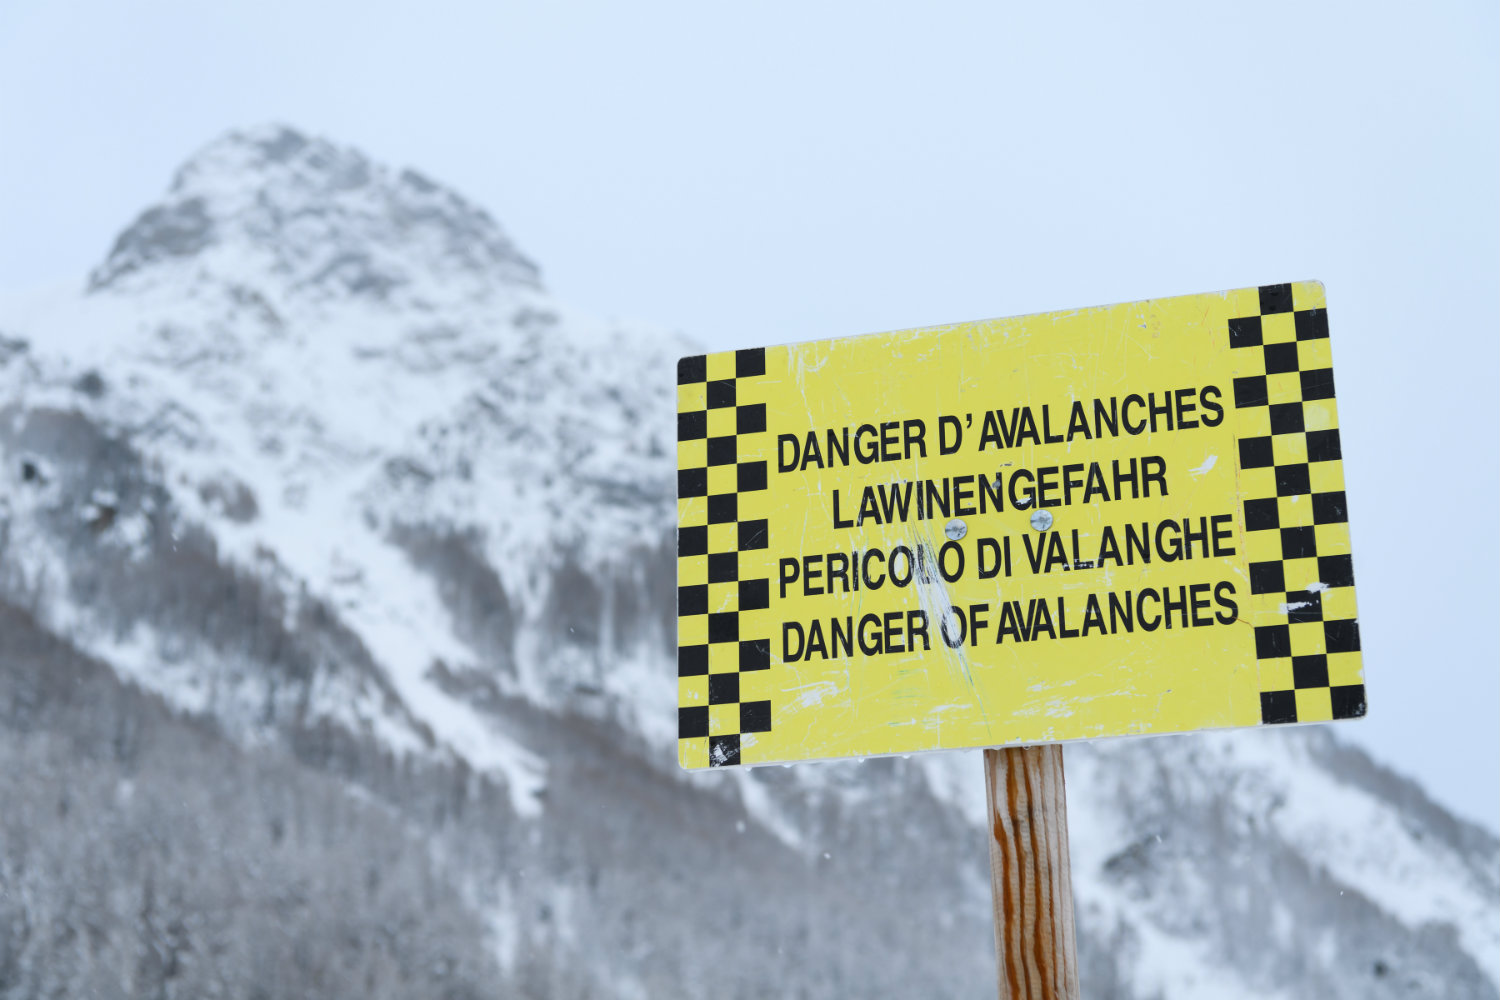 Danger of Avalanches sign in Switzerland. Avalanches claimed two lives in Switzerland due to dangerous conditions.  